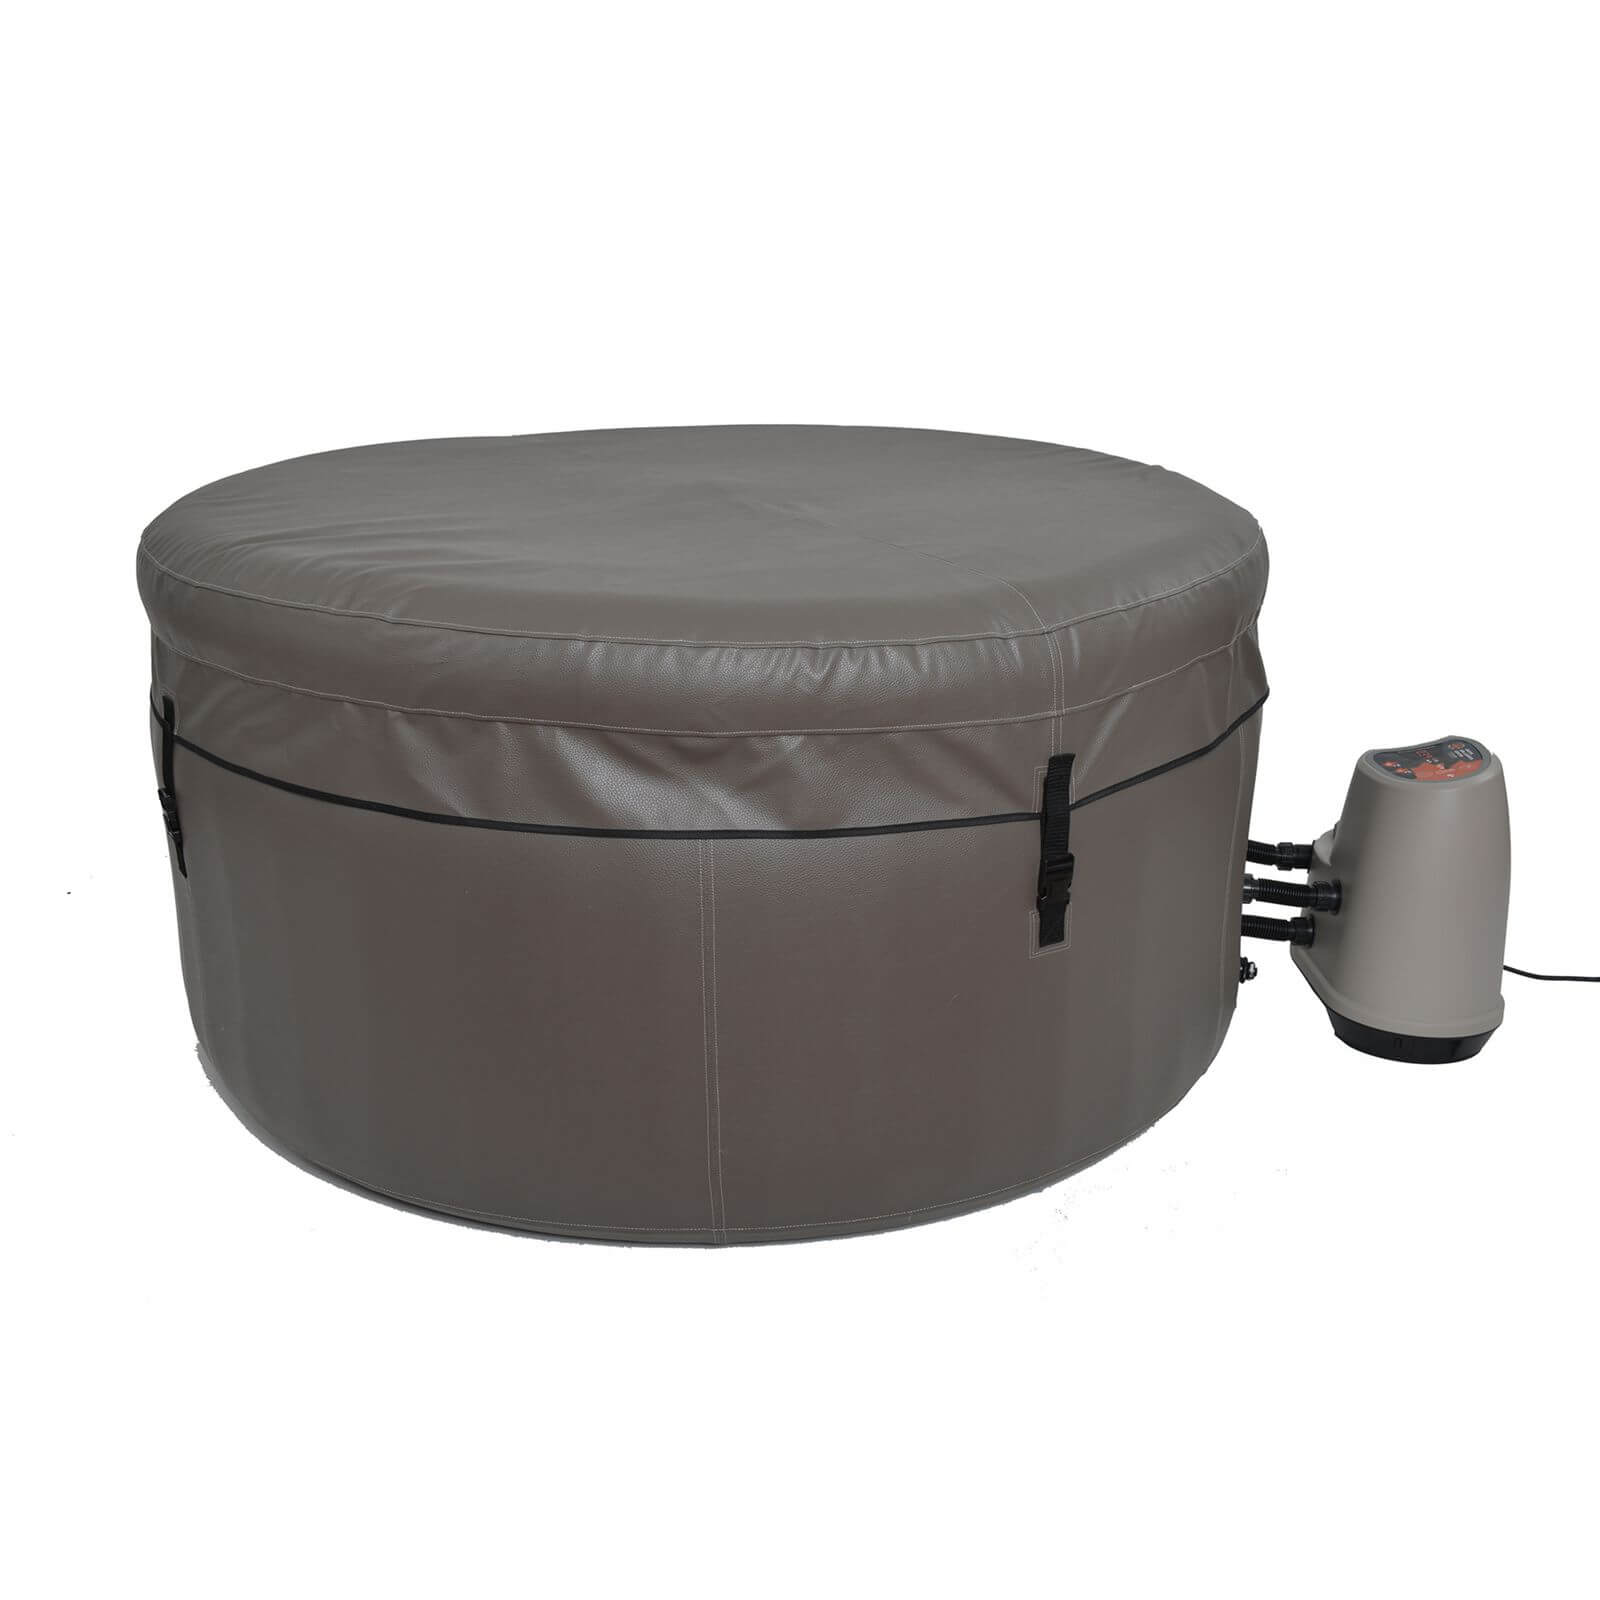 Grand Rapids 4 Person Inflatable Hot Tub by Canadian Spa (Extra Deep)